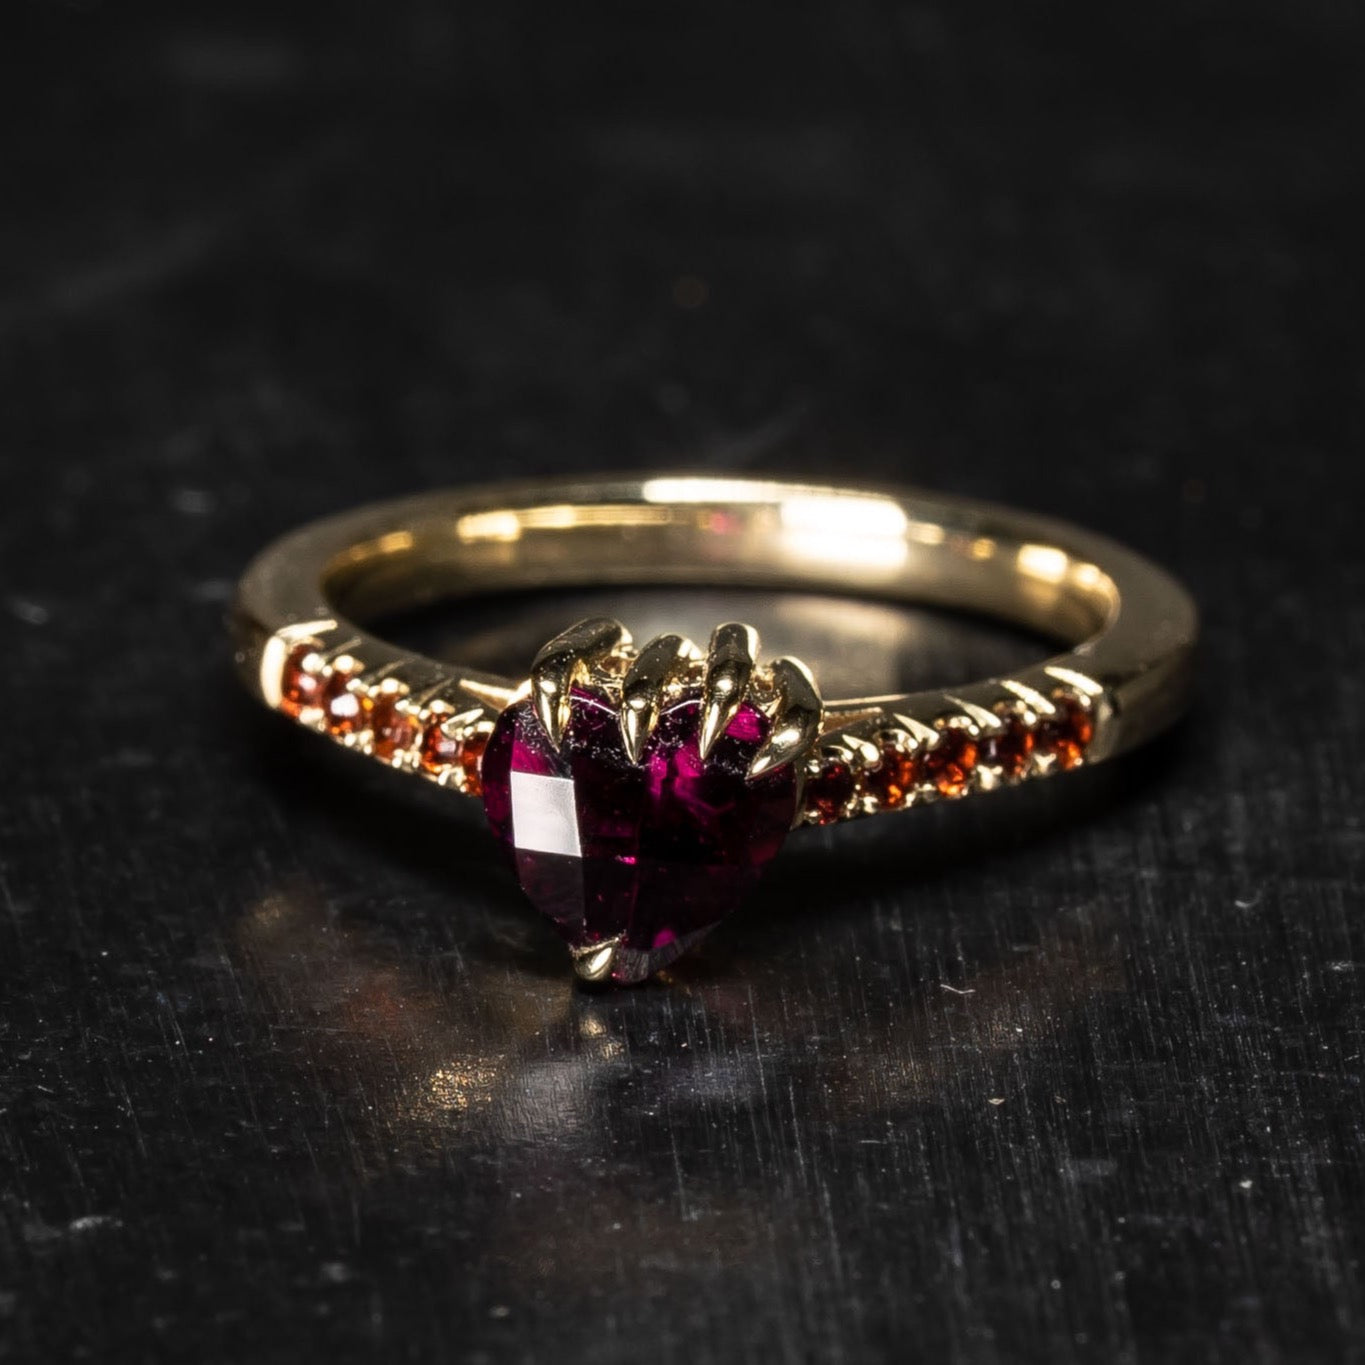 Darkly beloved collection ring with heart shaped garnet